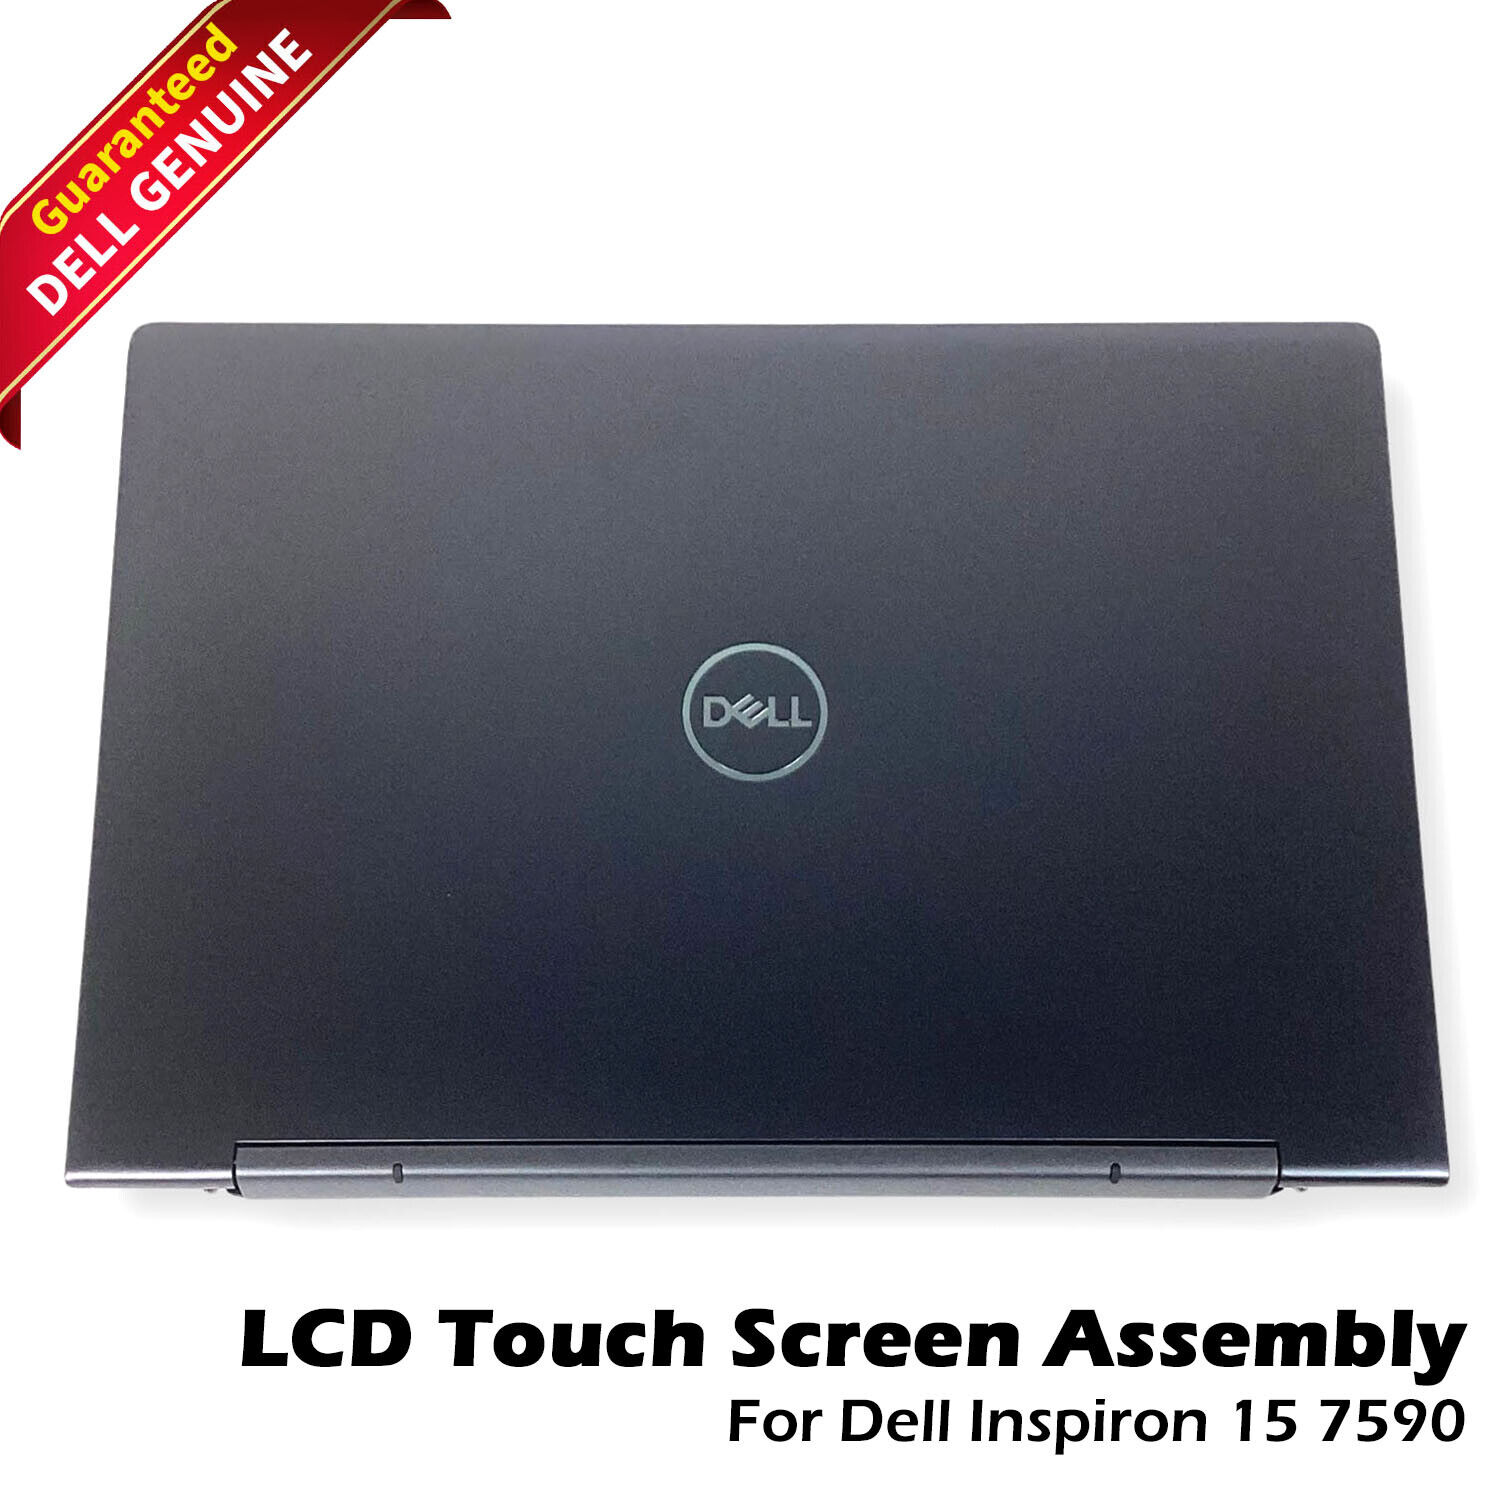 Genuine Dell Inspiron 15 7591 UHD LCD Touch Screen Assembly Complete Black 5R82W